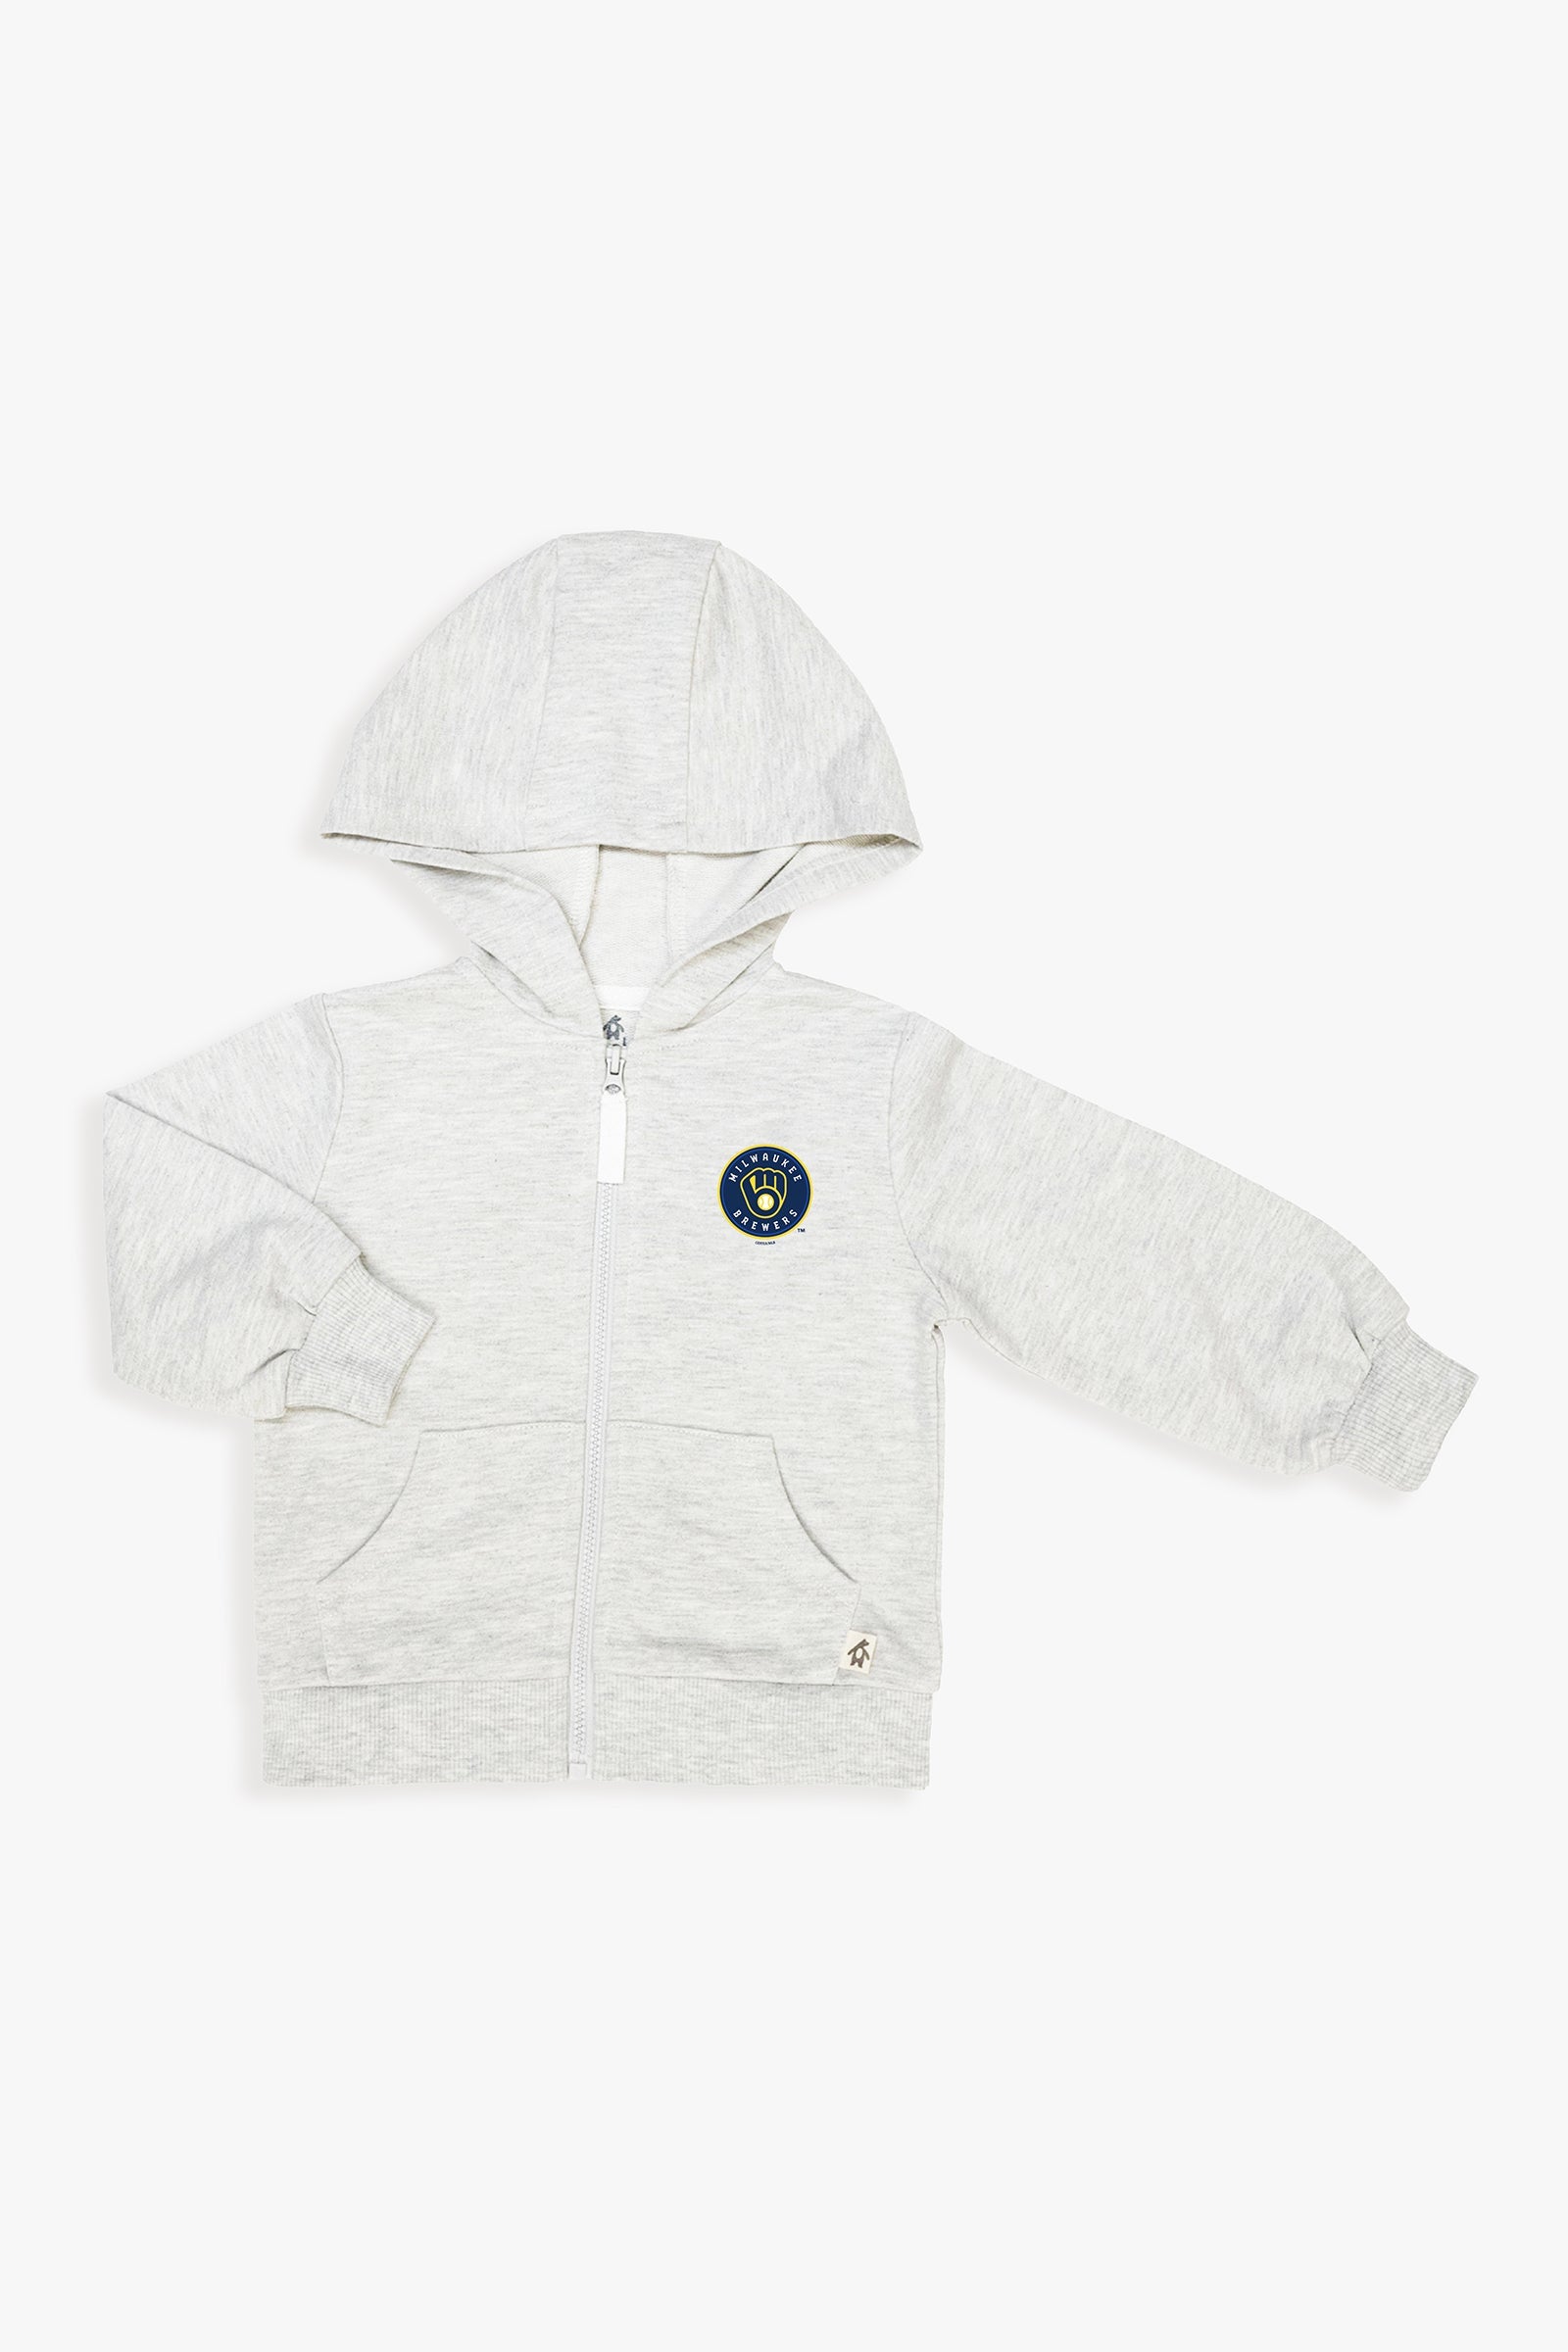 MLB Unisex Baby French Terry Cotton Zip-Up Hoodie